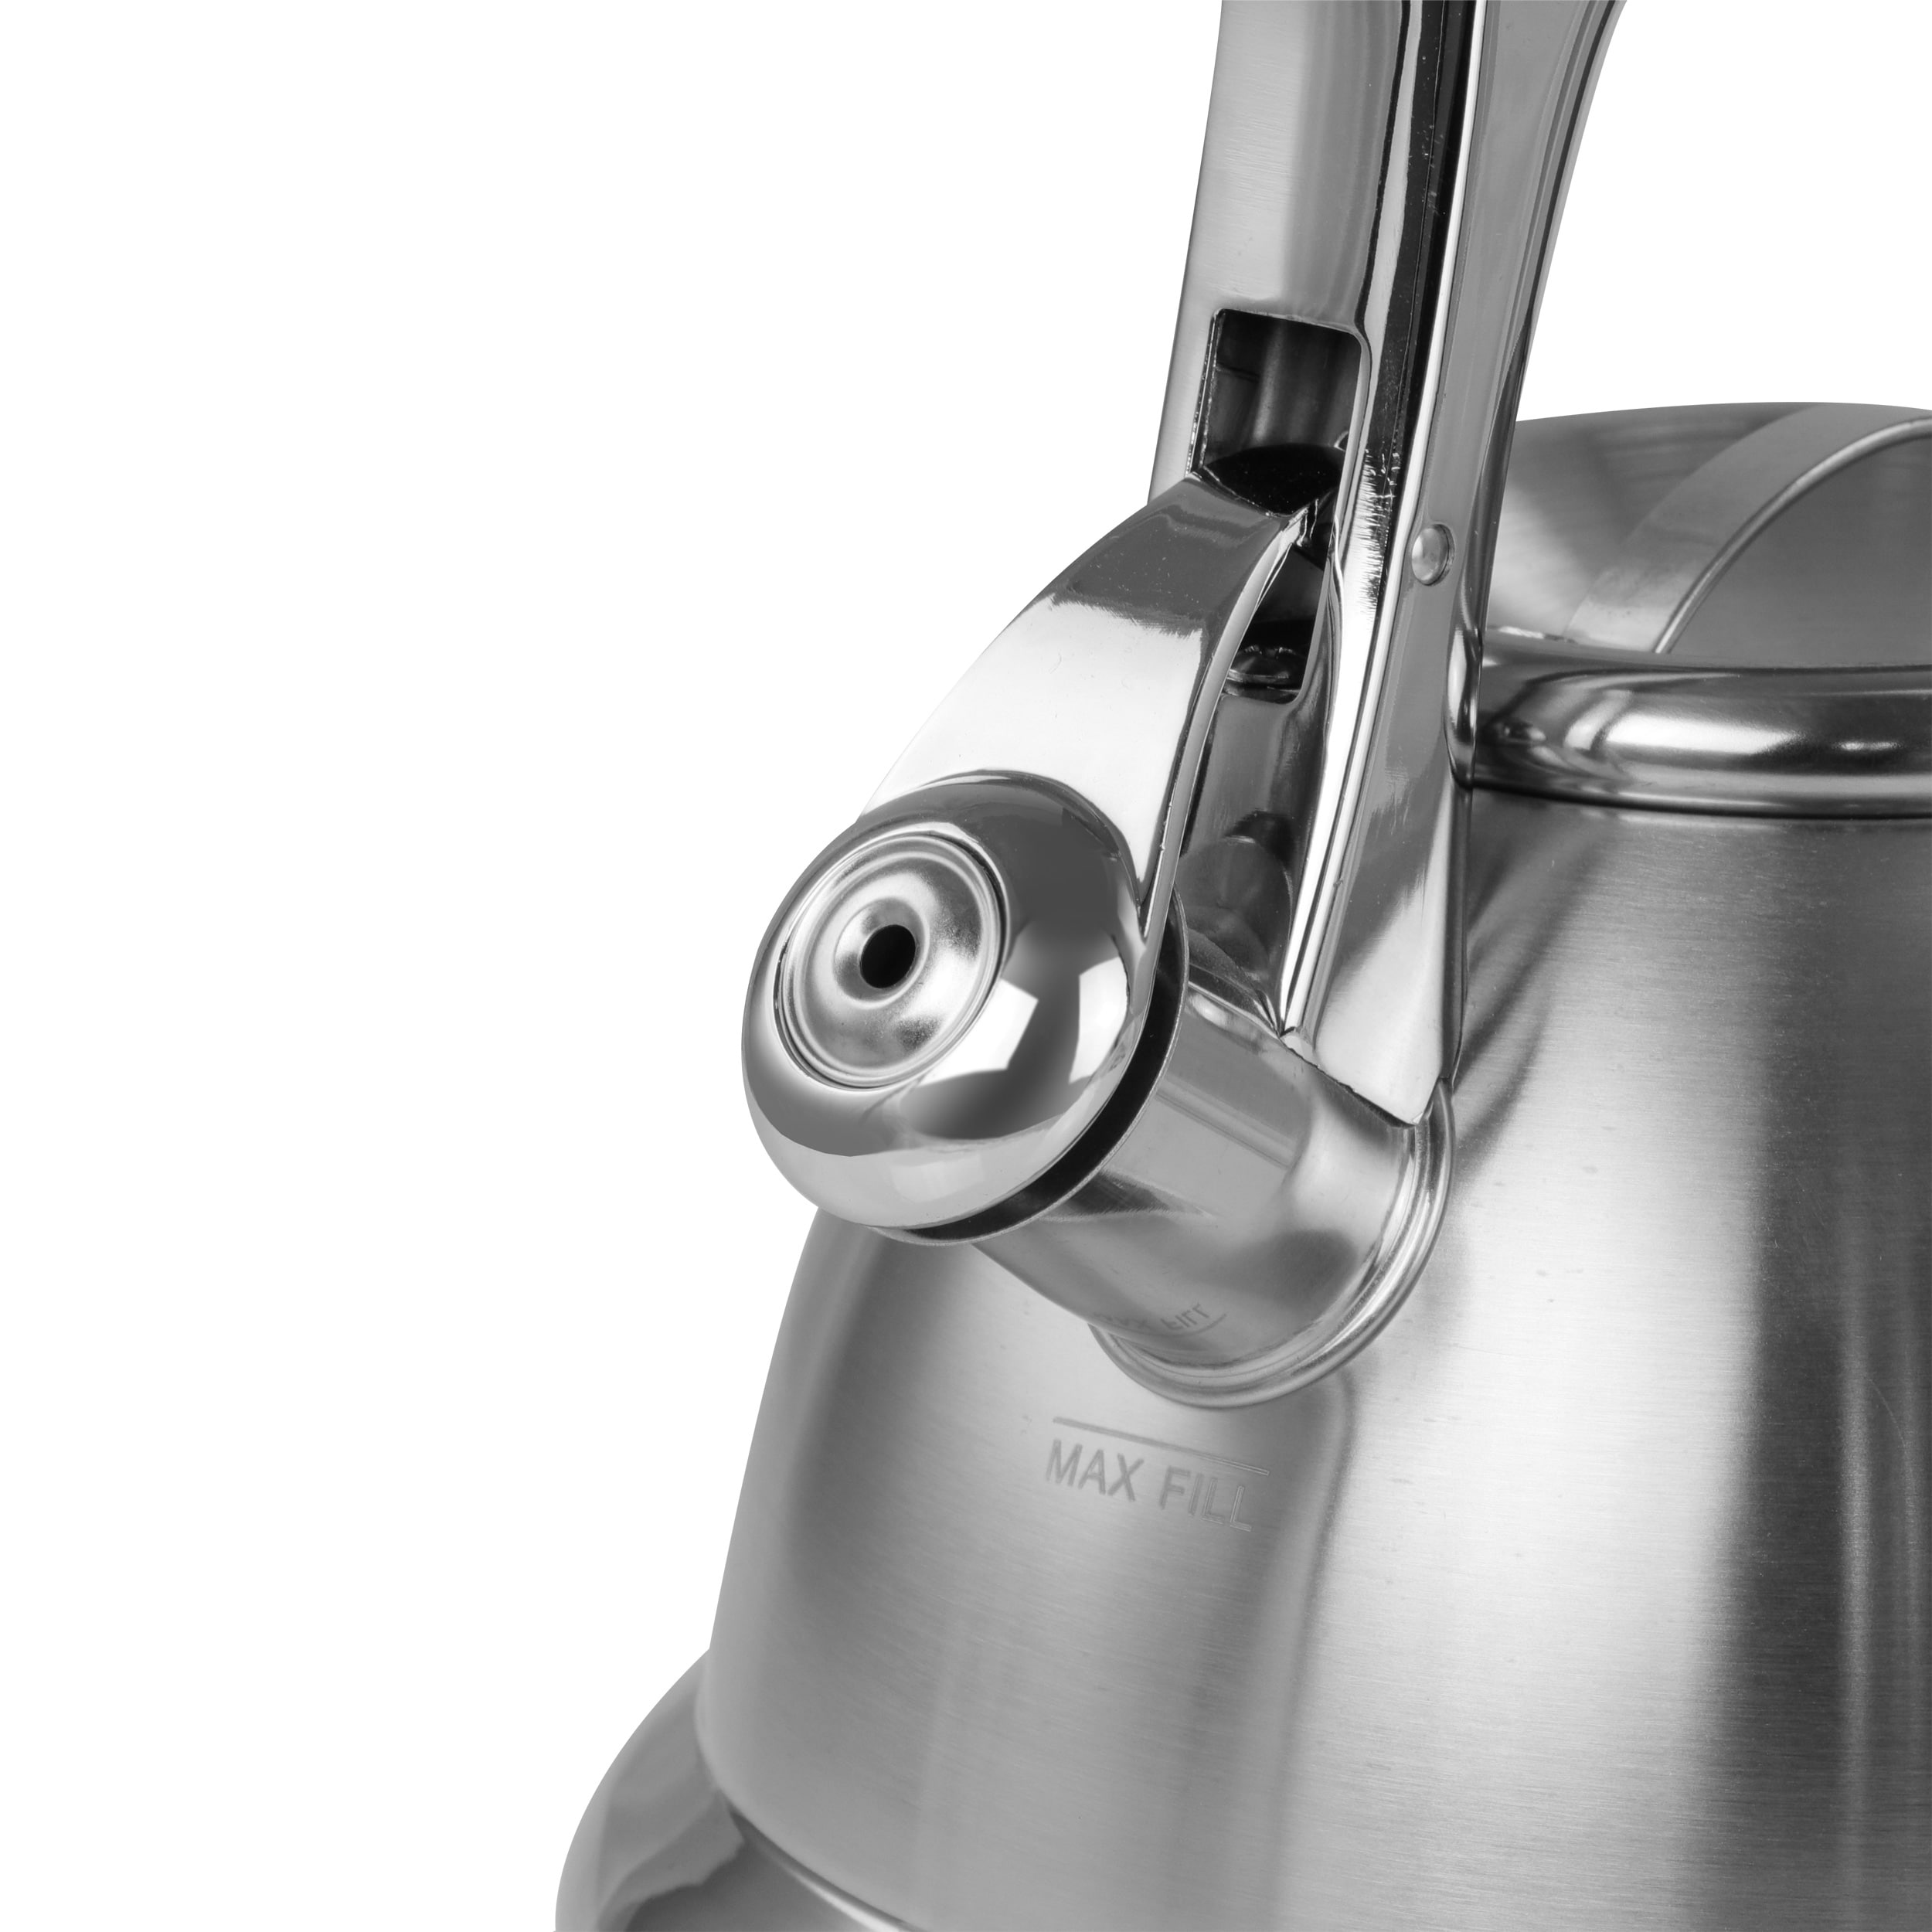 Copco Gray Stainless Steel 1.8 qt Tea Kettle - Ace Hardware